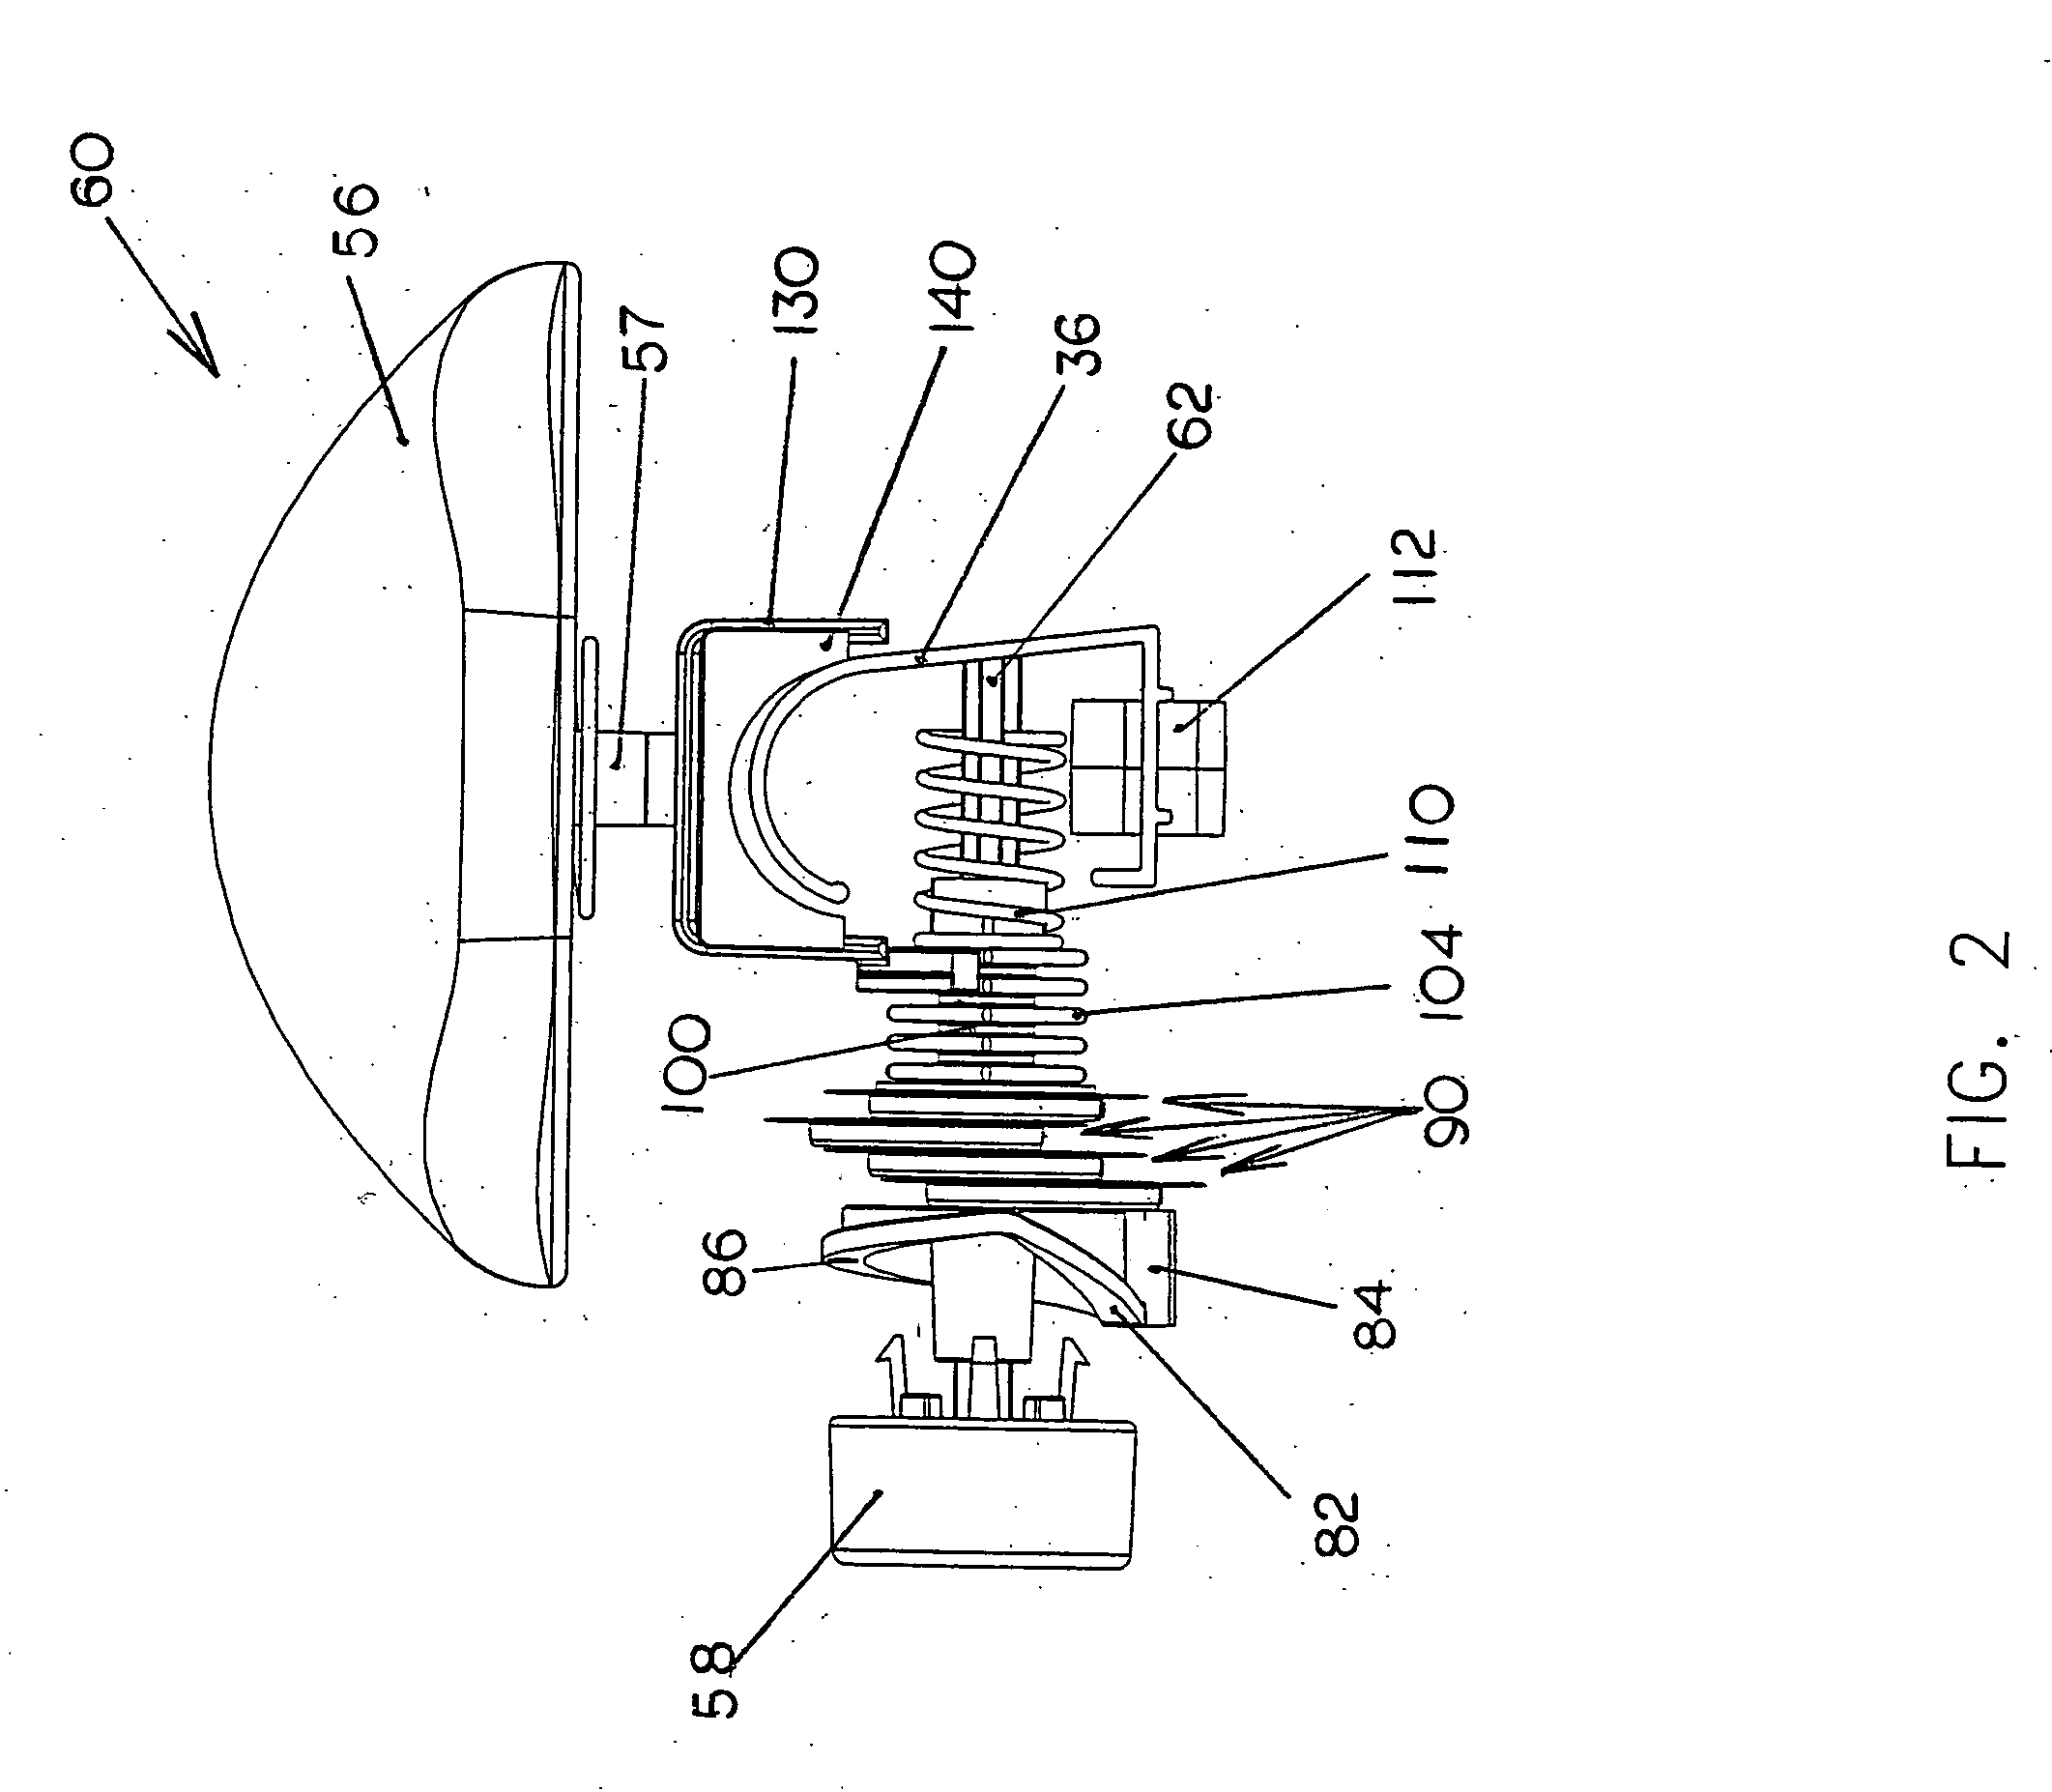 Rotary trimmer with switchable blades